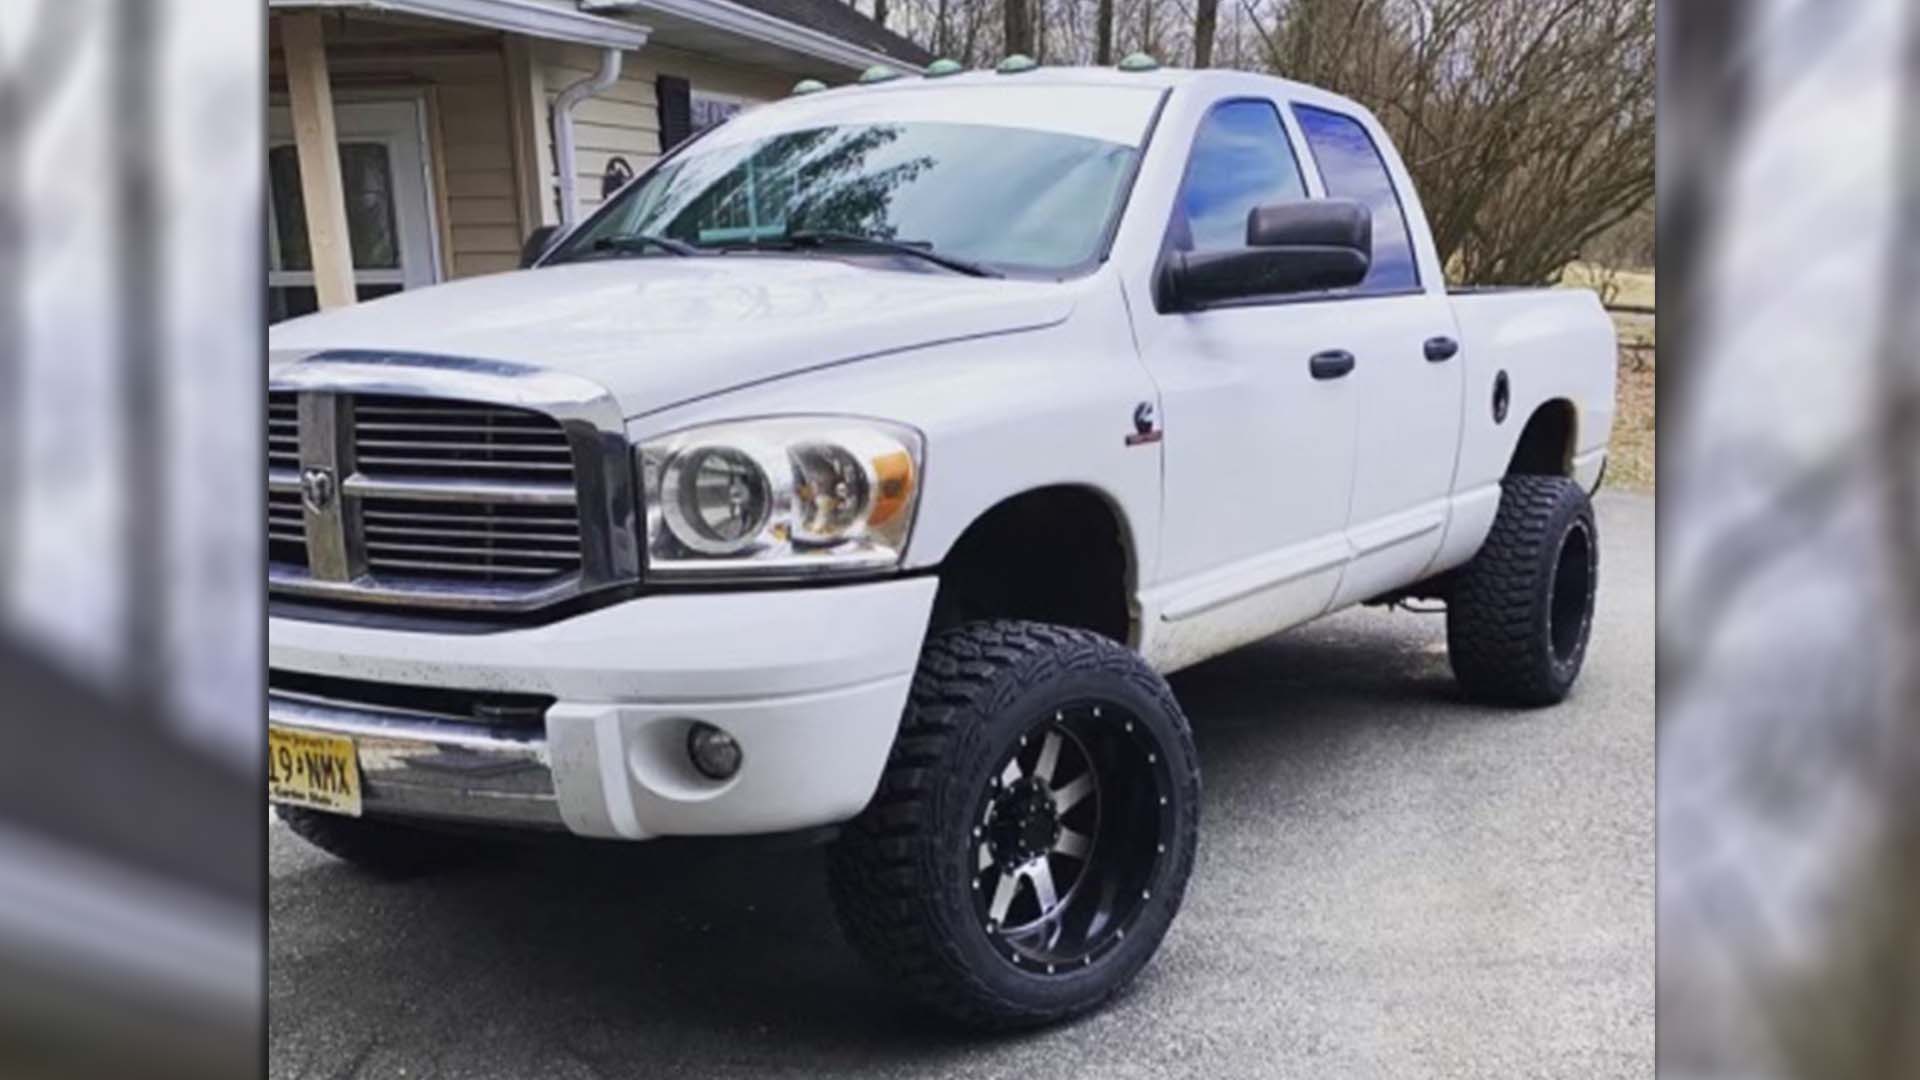 Diesel Ram Owner Forced to Scrap Truck Over Deleted Emissions Equipment (UPDATED)